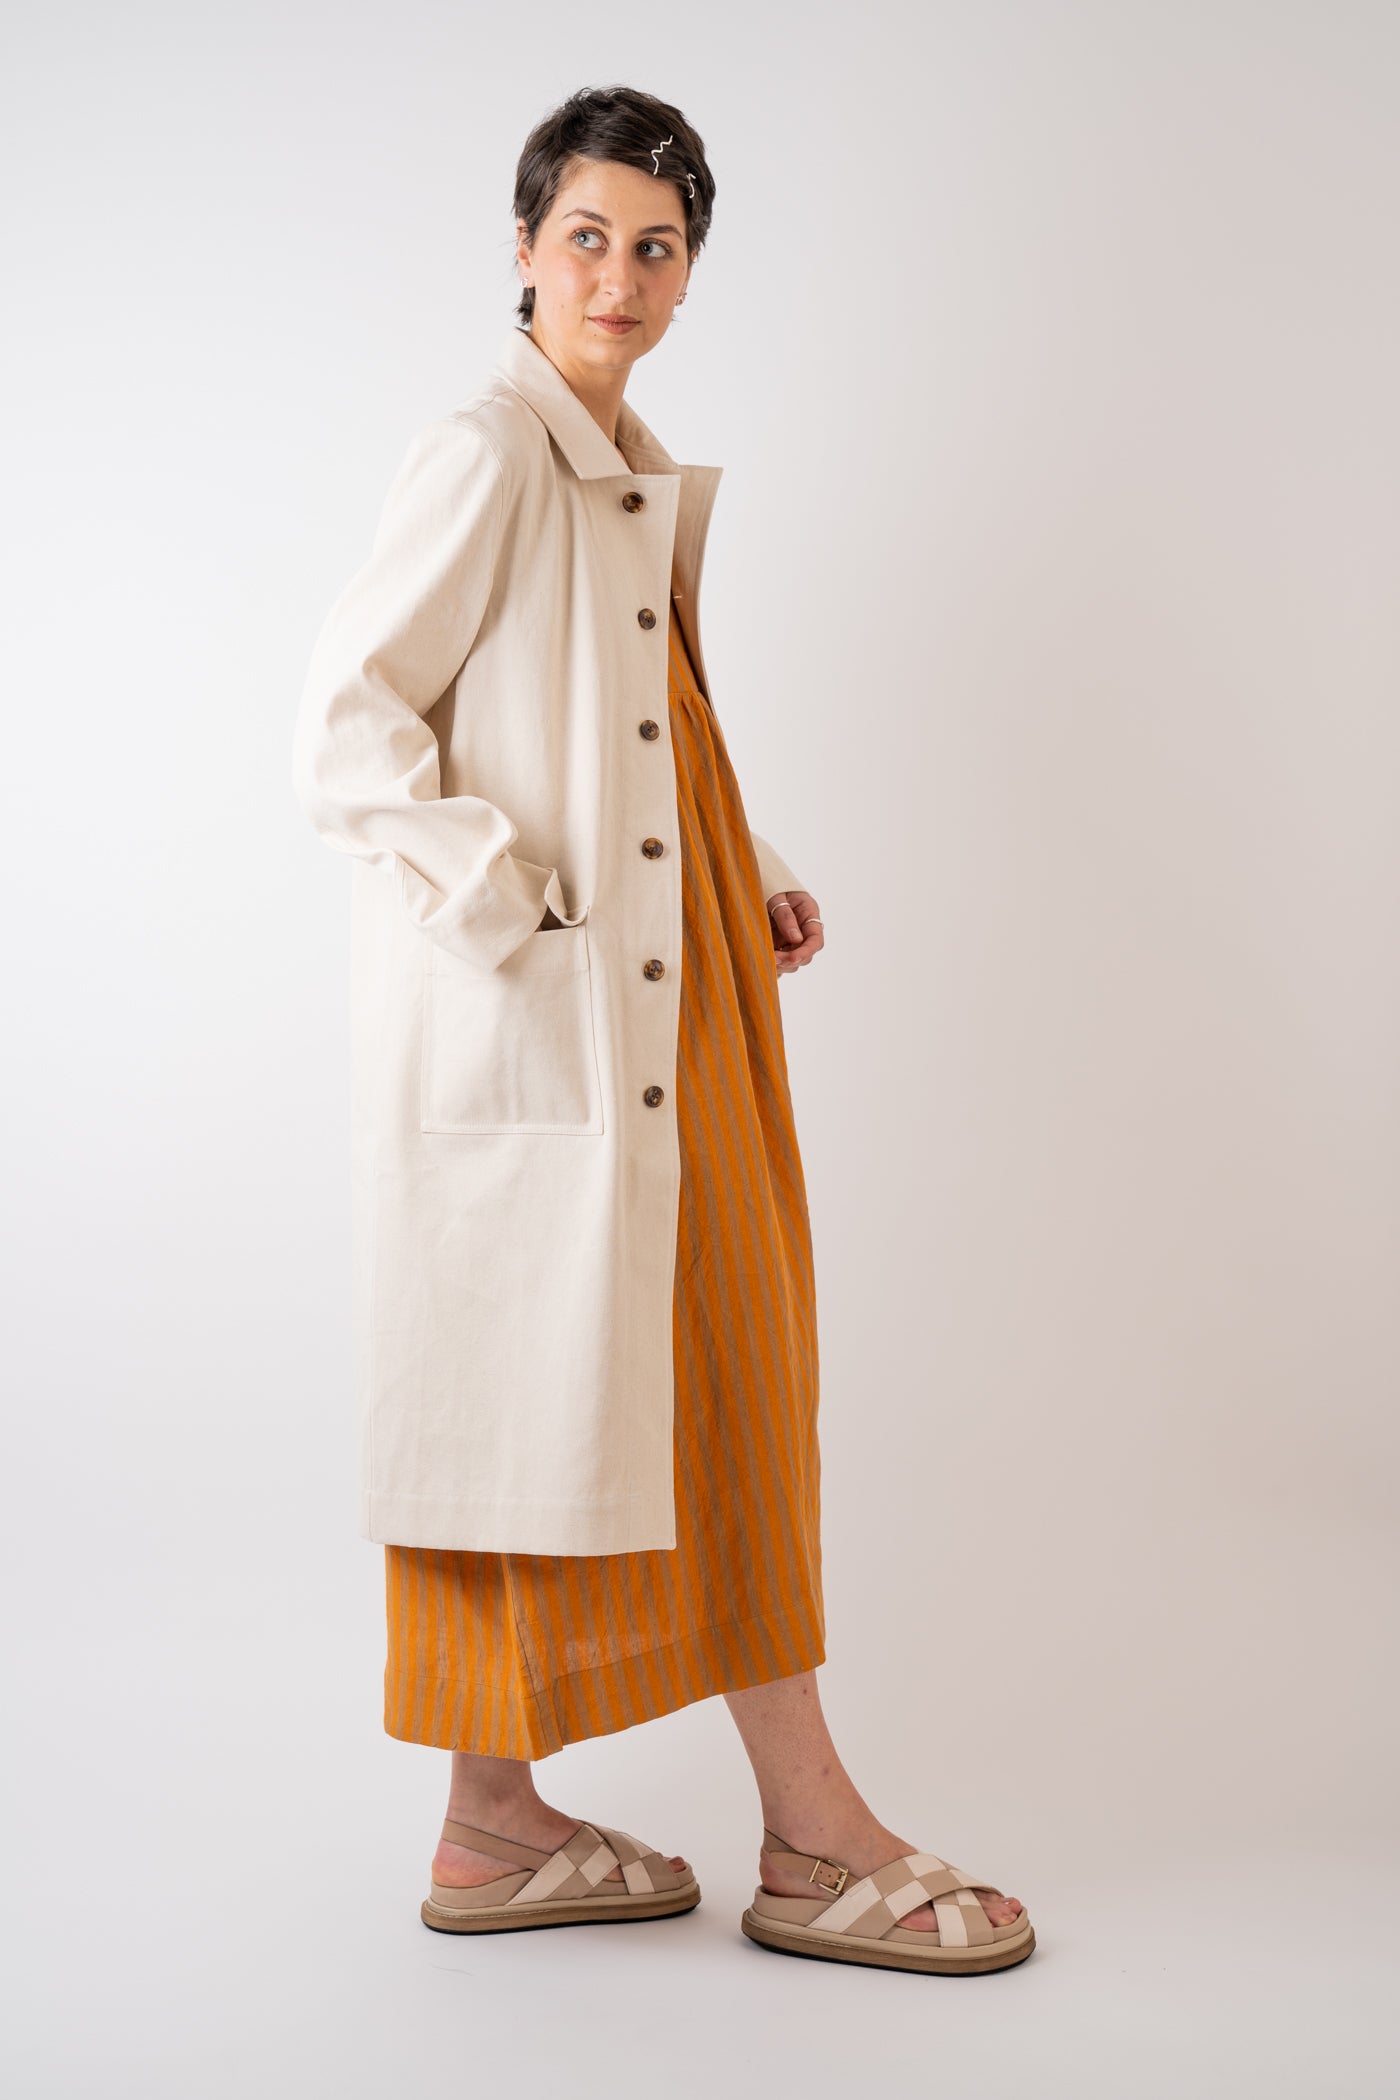 Xi Atelier Organic Cotton Drill Yves Coat in Ecru handmade in Glasglow with patch pockets